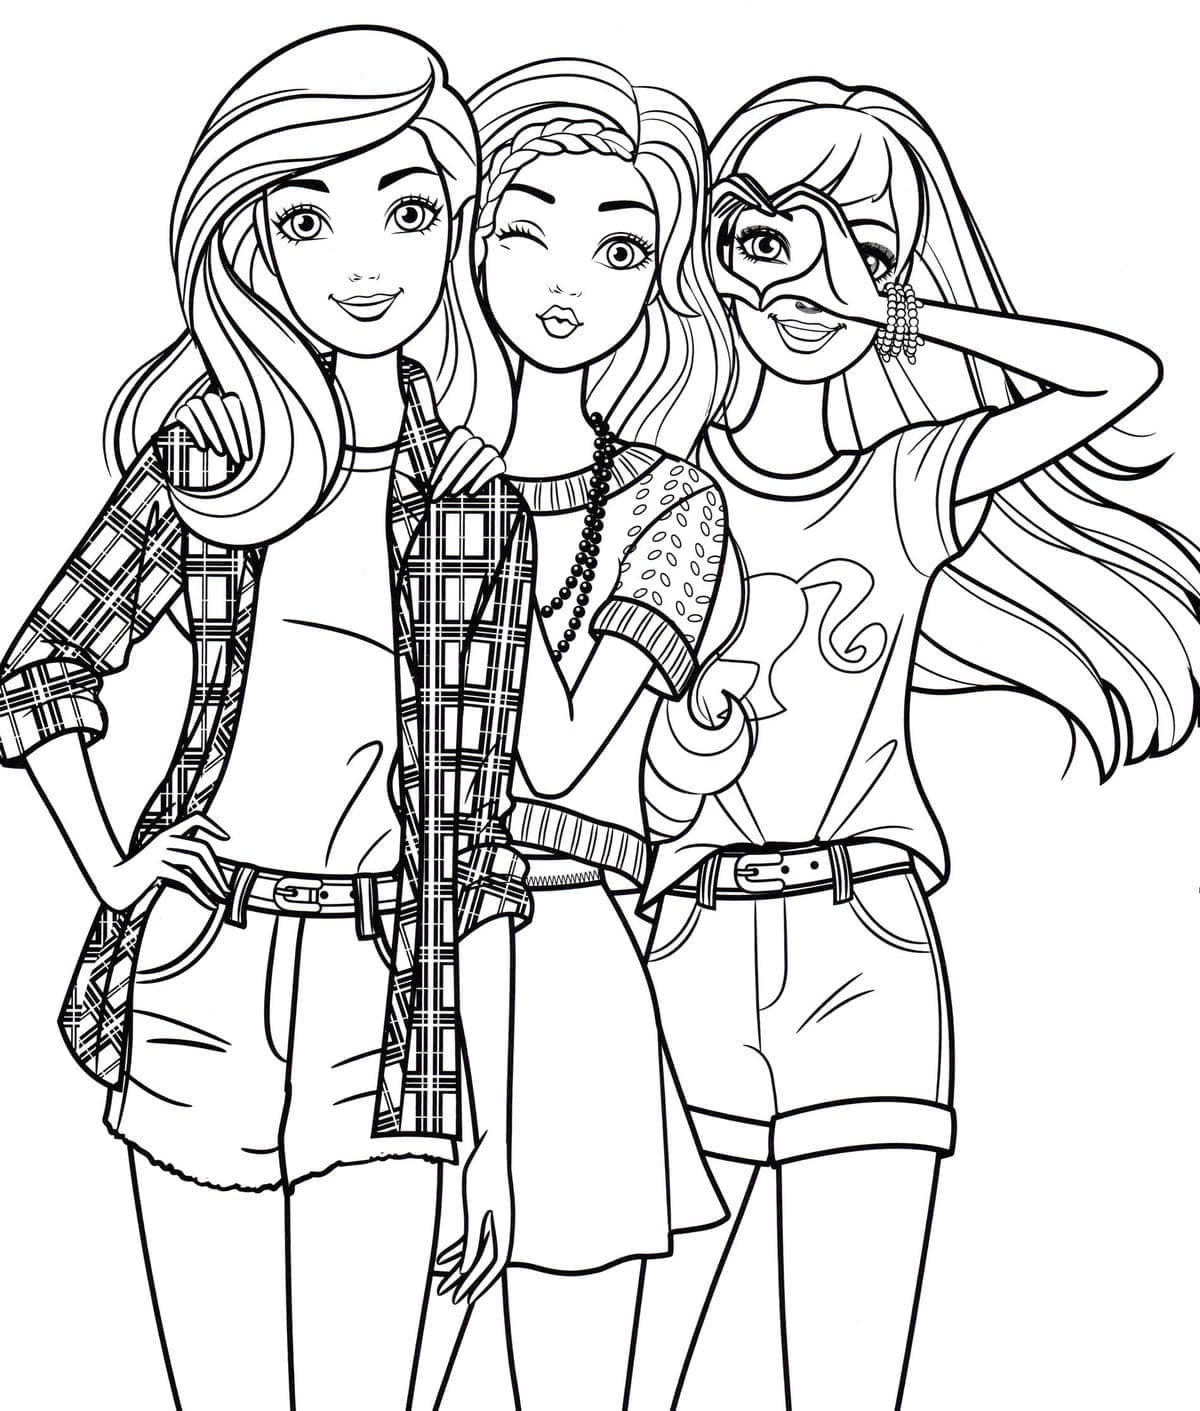 Barbie and Her Friends coloring page - Download, Print or Color Online ...